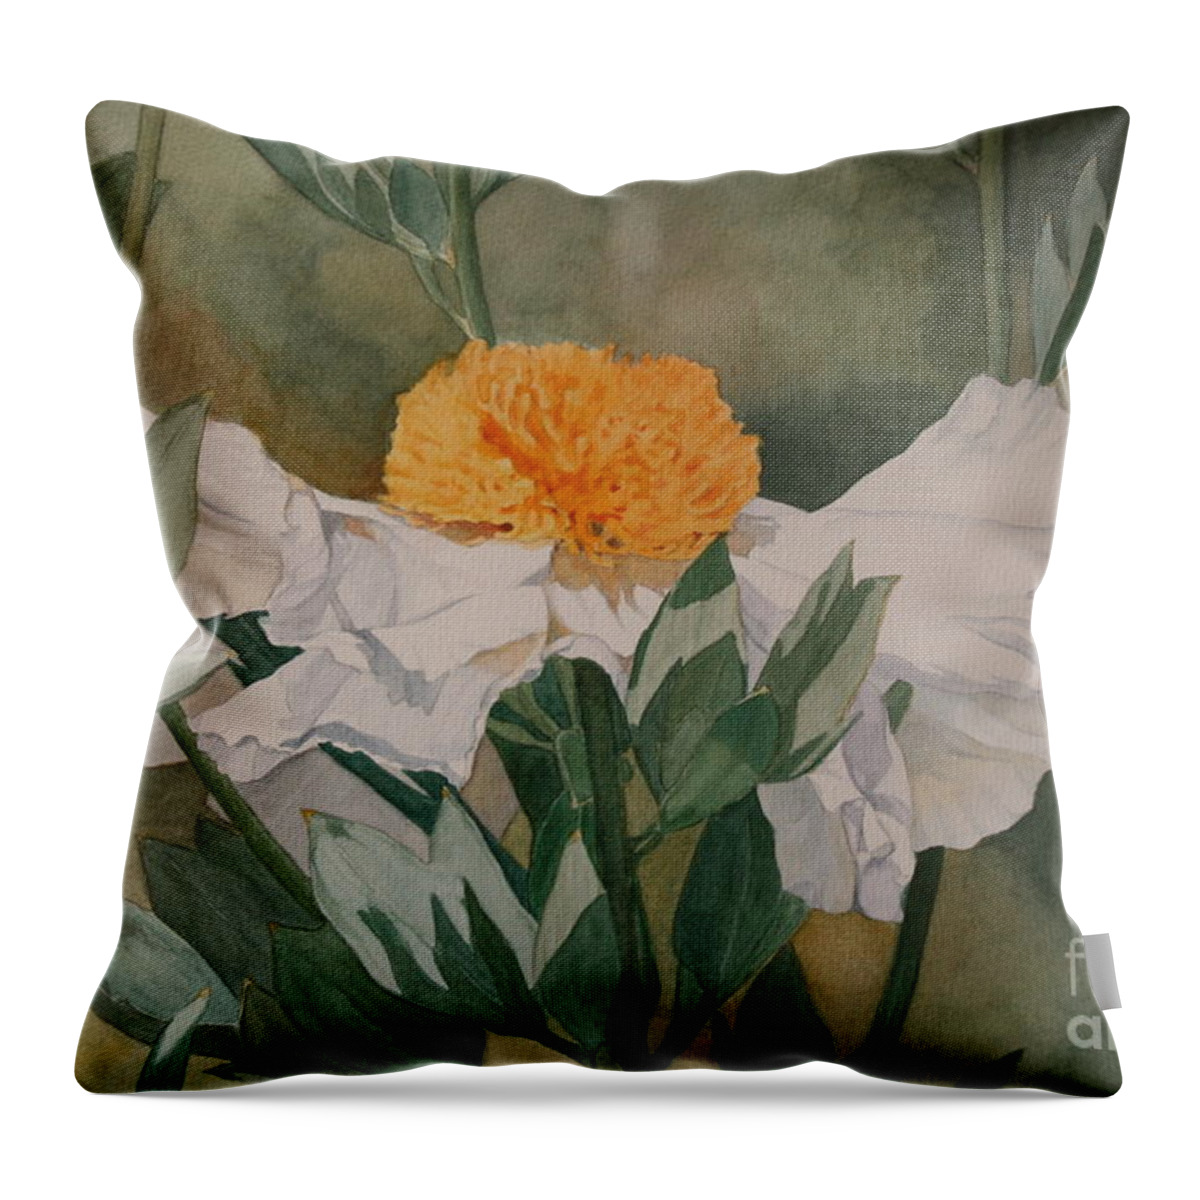 Flowers Throw Pillow featuring the painting Sundancer by Jan Lawnikanis